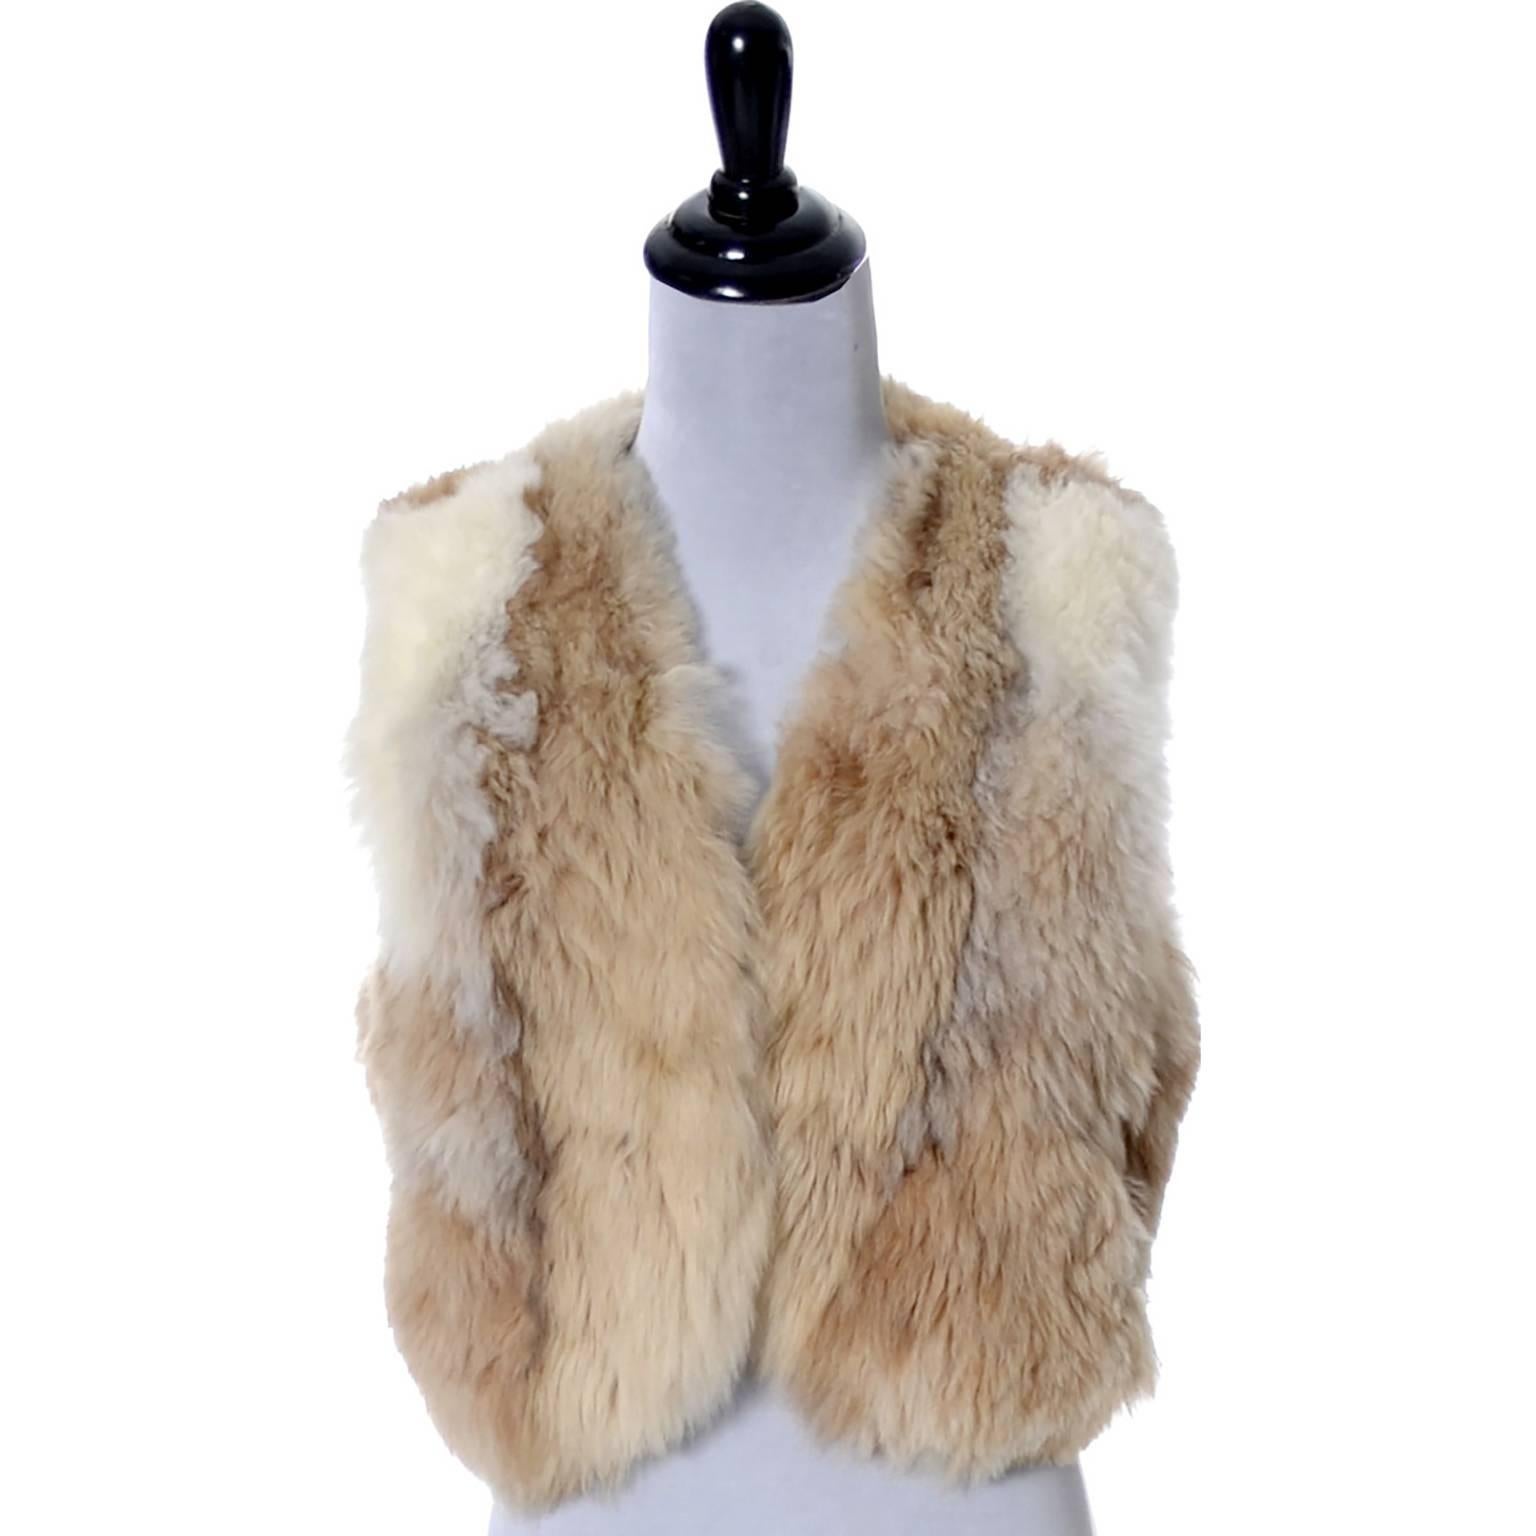 This is an incredibly soft late 60's or early 1970's vintage fur vest from Highlands Alpaca Furs.  This is a very thick, plush, alpaca fur vest with side slit pockets and pretty chocolate brown satin lining. This vest fits up to a size 36 bust if